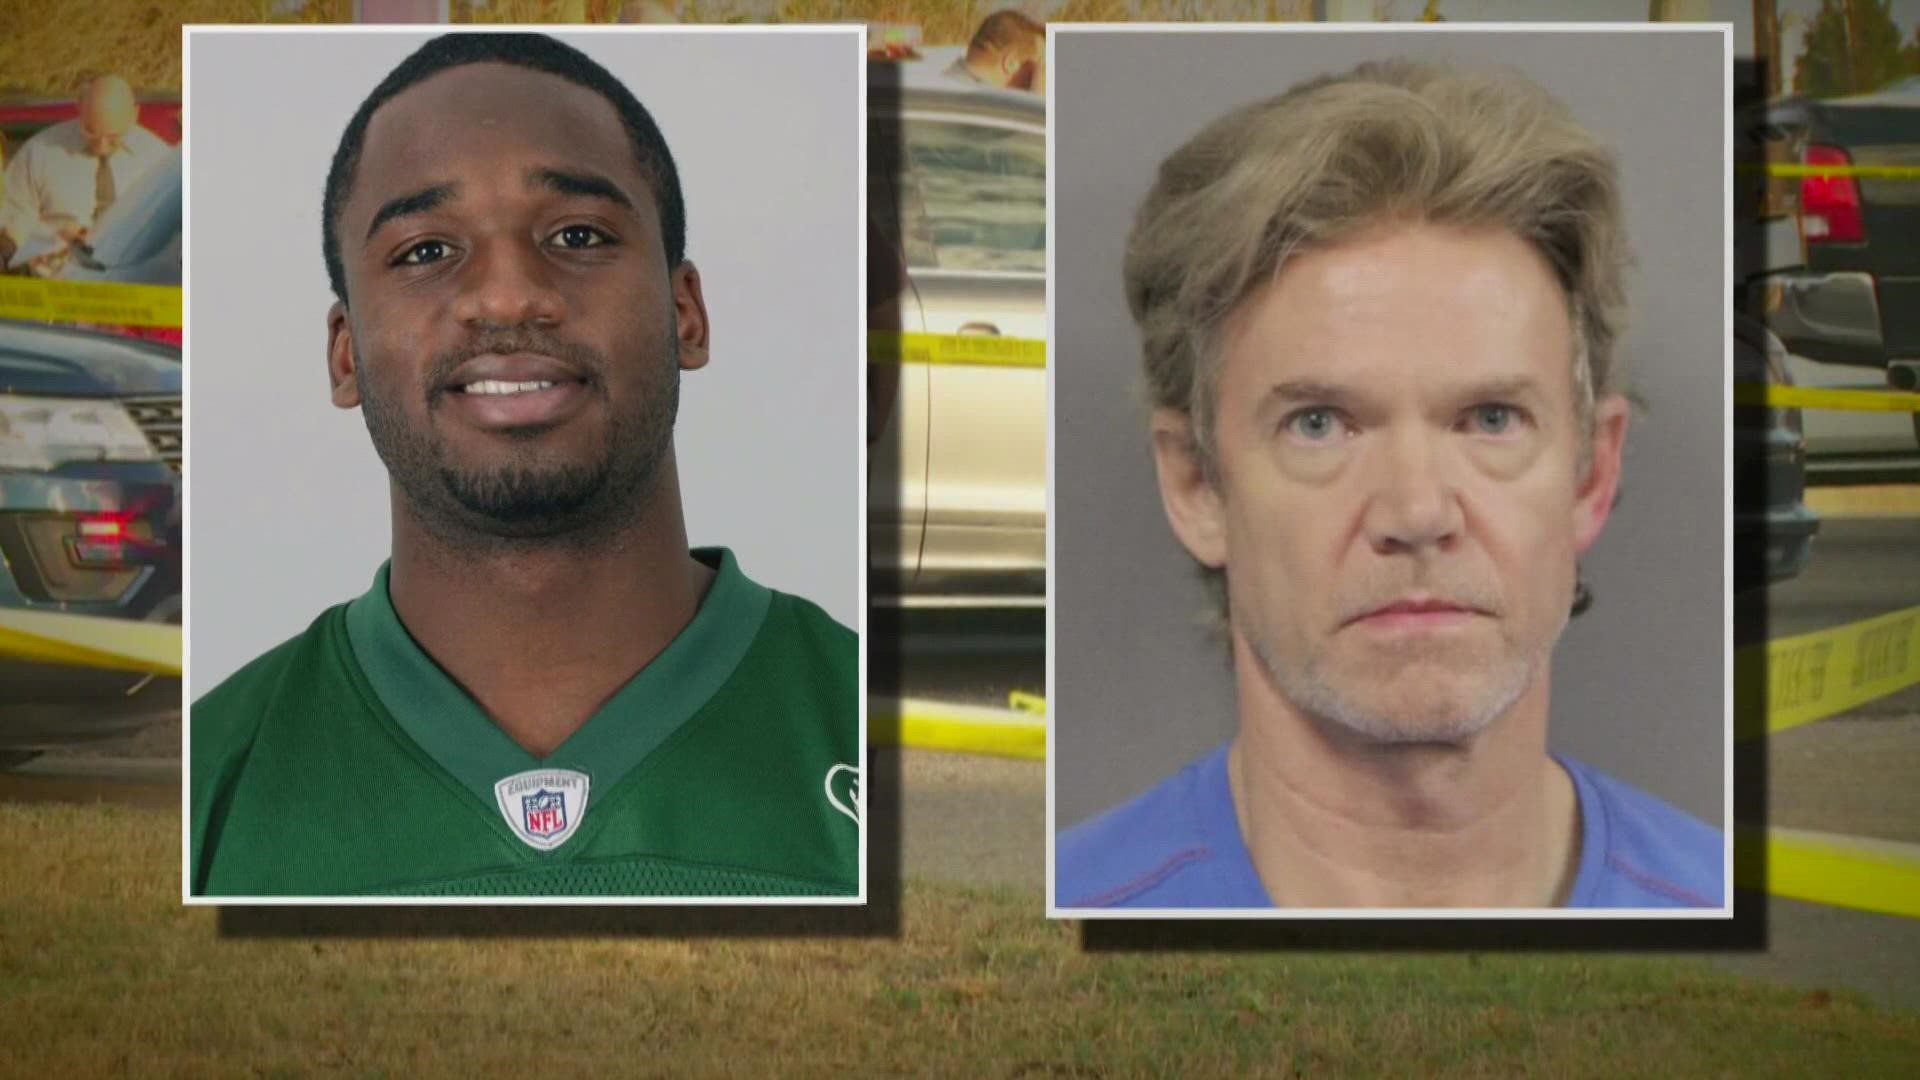 Will Joe McKnight's killer be tried again? It is in the hands of the Louisiana Supreme Court.